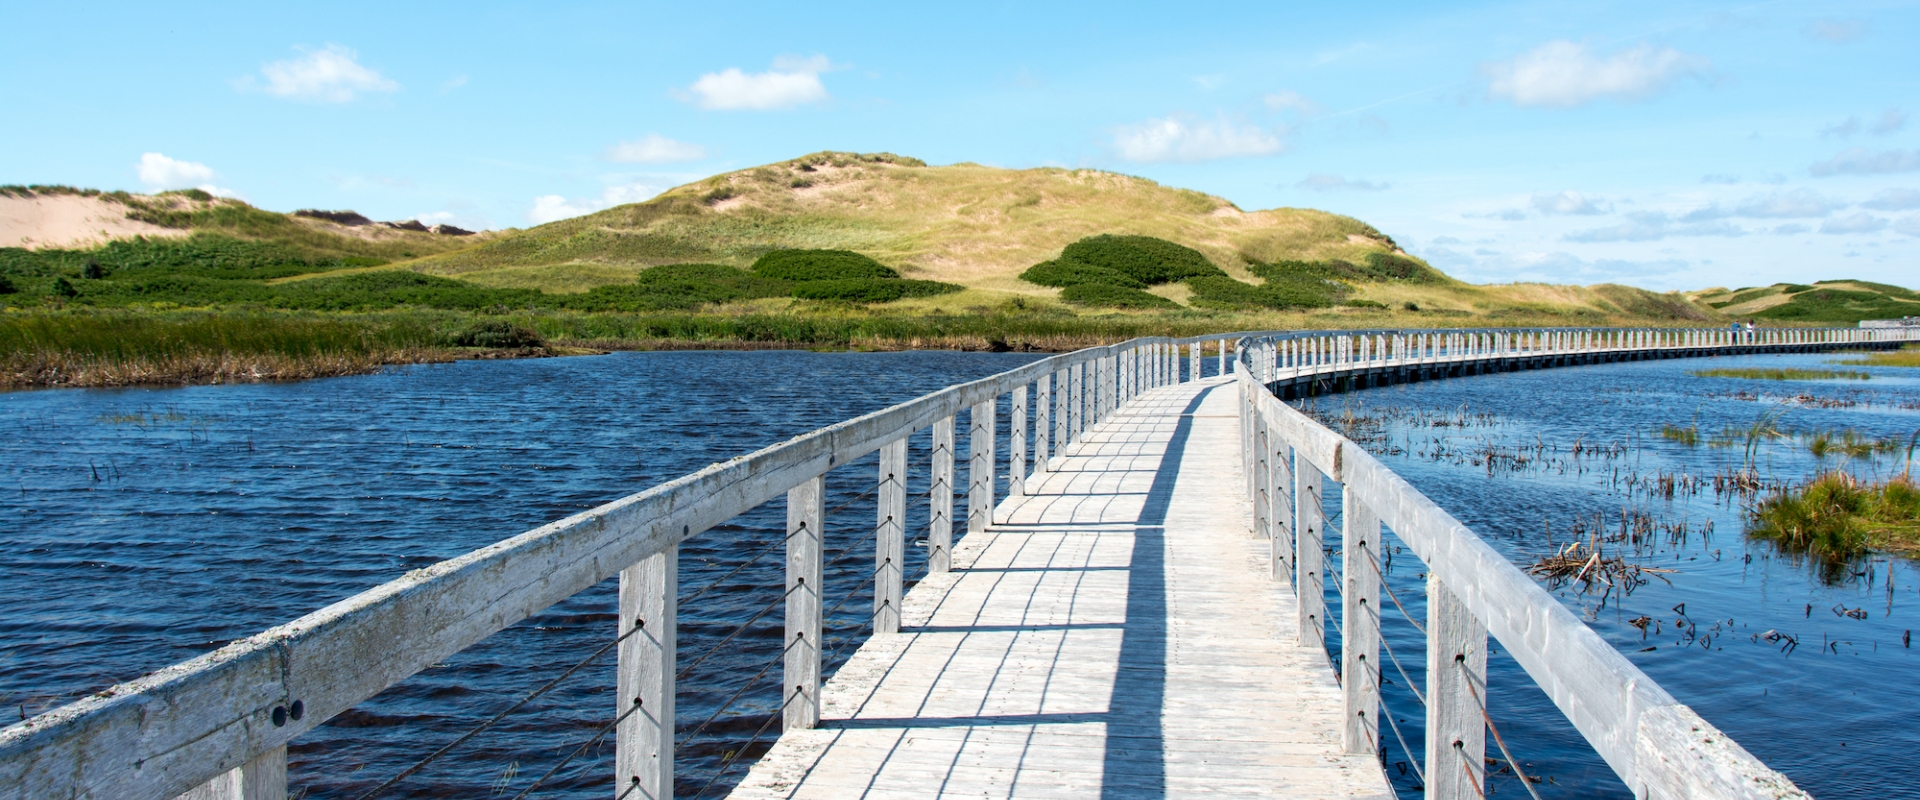 A wooden footbridge across calm blue water with rolling green hills in the background on a sunny day.